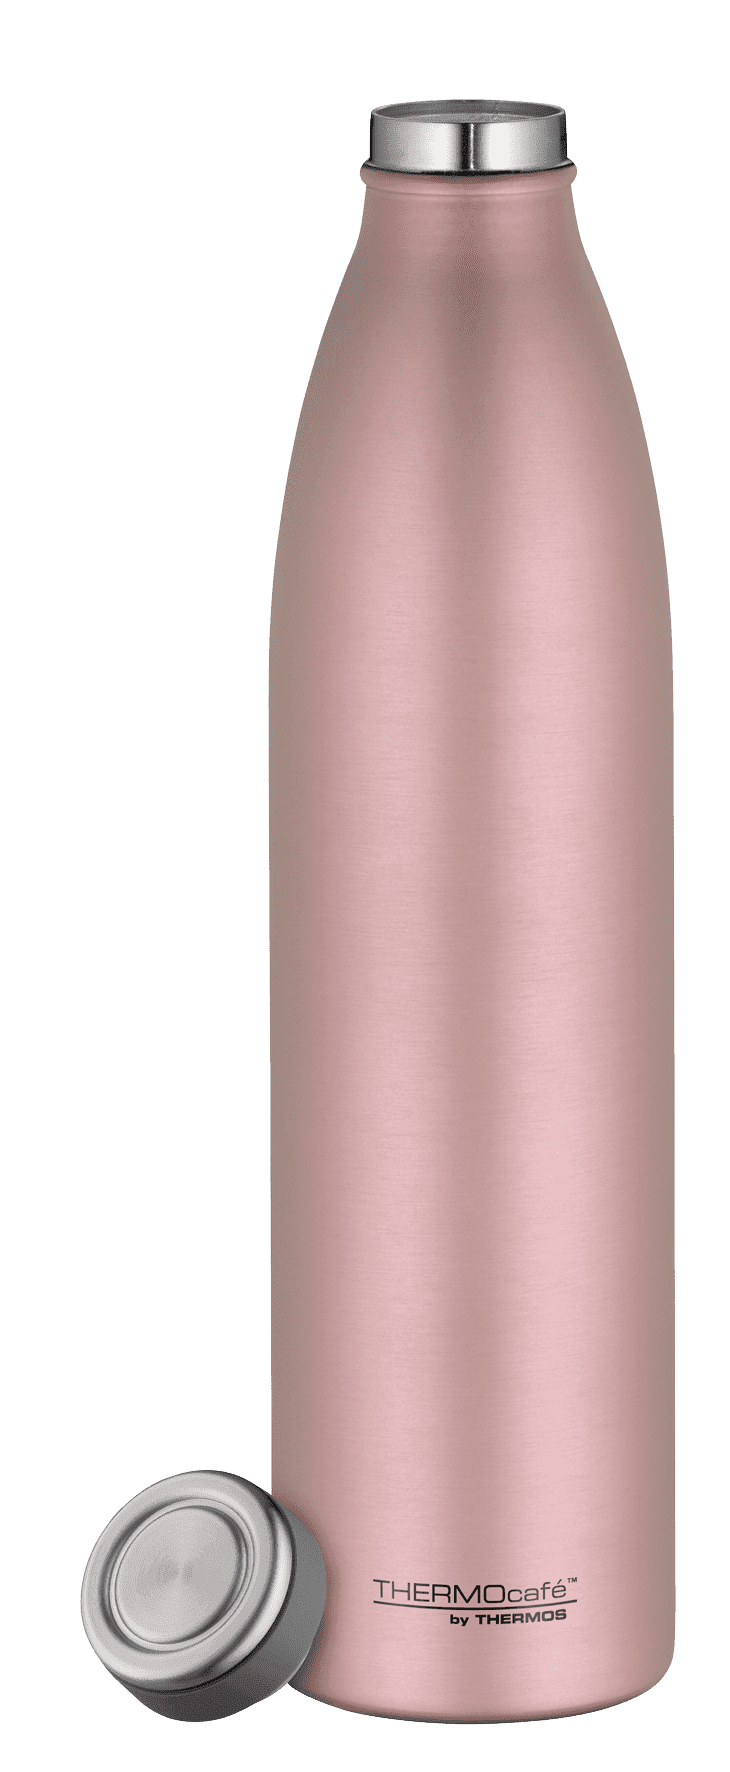 Thermos Thermocafé Isolierflasche 4067 rose gold 1,0l, deckel